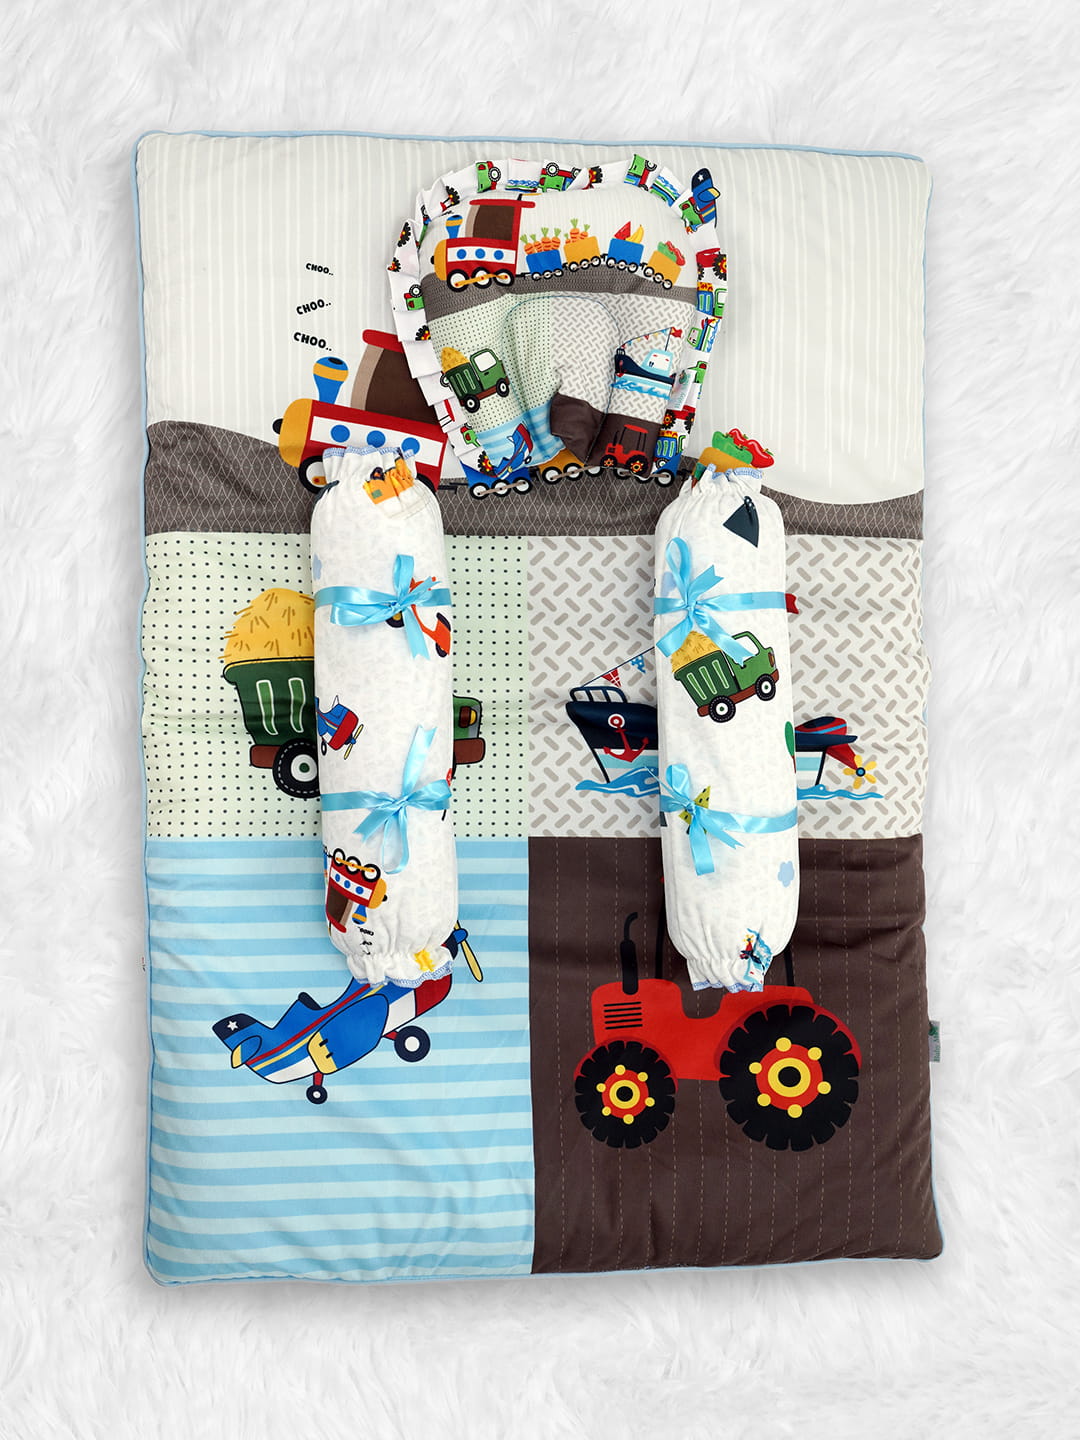 Baby Moo Truck And Car Soft Velvet U Pillow, 2 Side Bolsters Mattress Set - Multicolour - Baby Moo